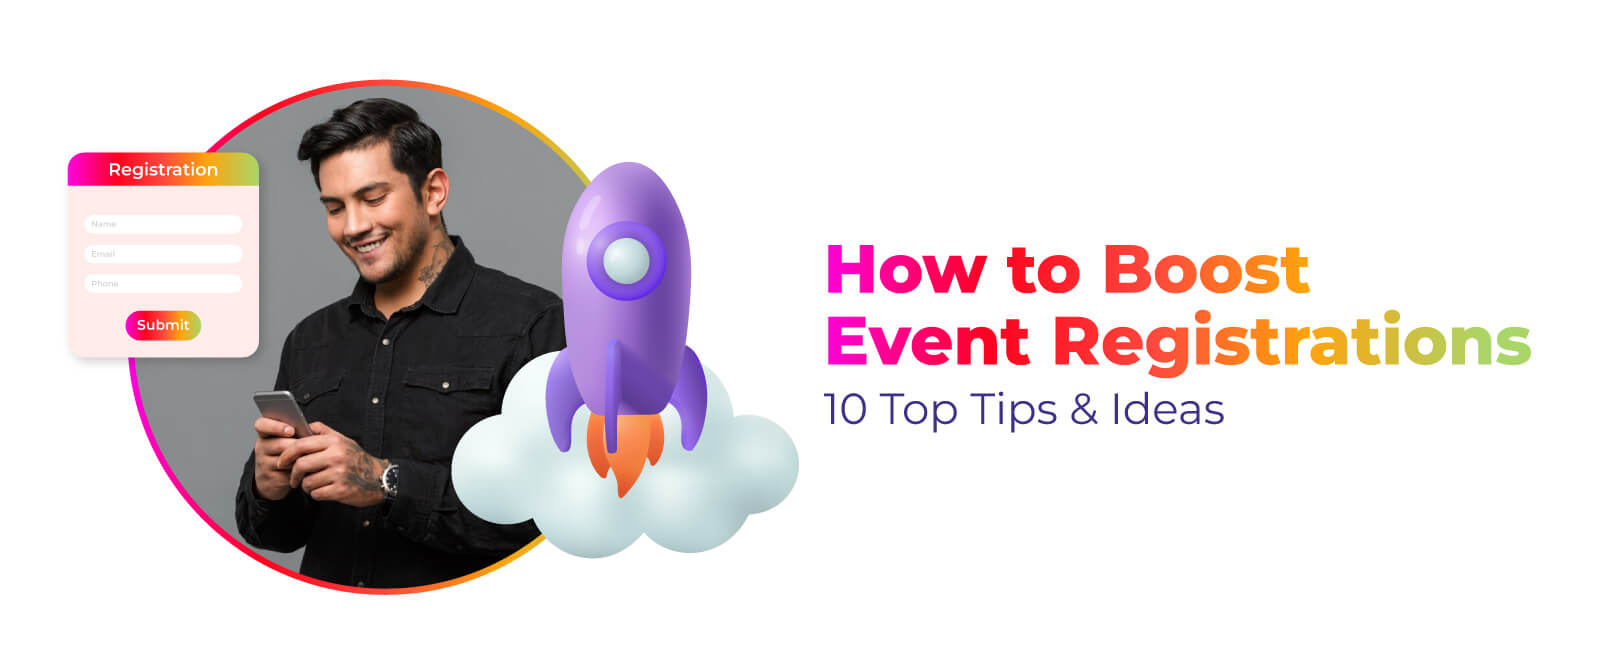 How to Boost Event Registrations: 10 Top Tips & Ideas